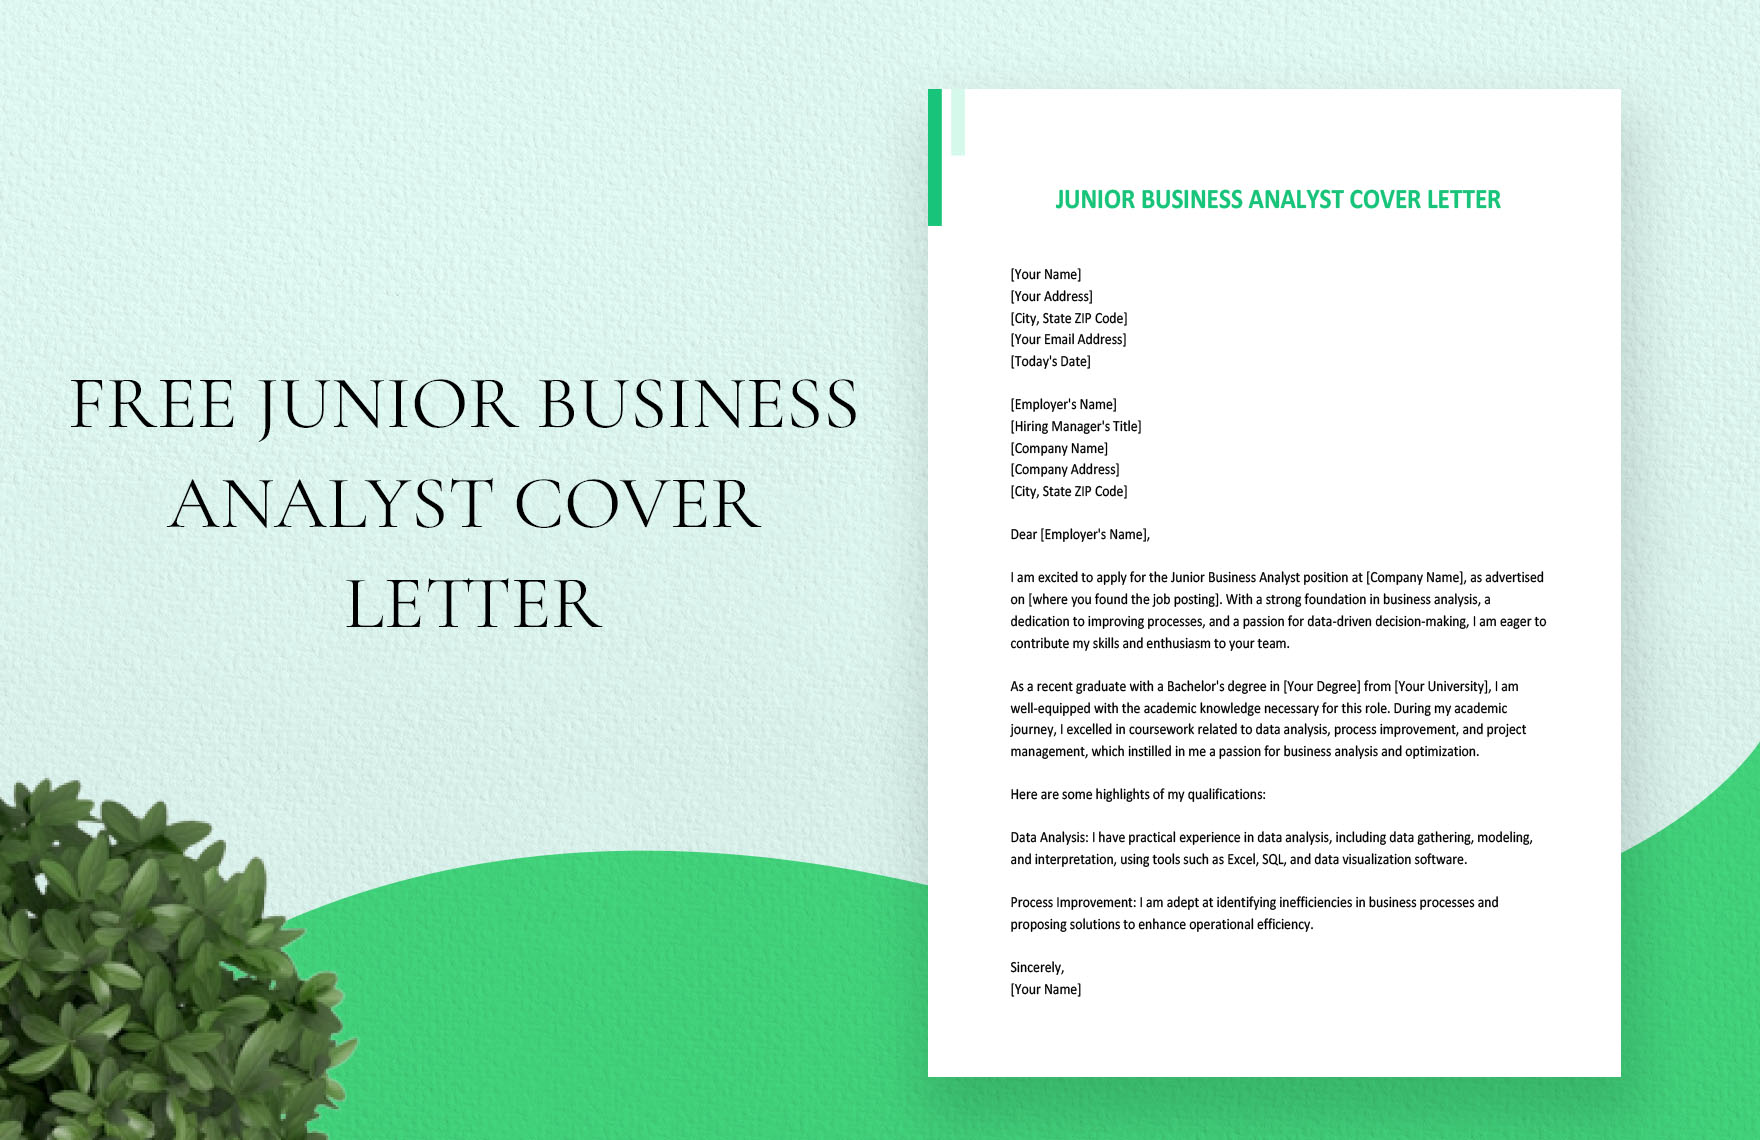 Junior Business Analyst Cover Letter in Word, Google Docs